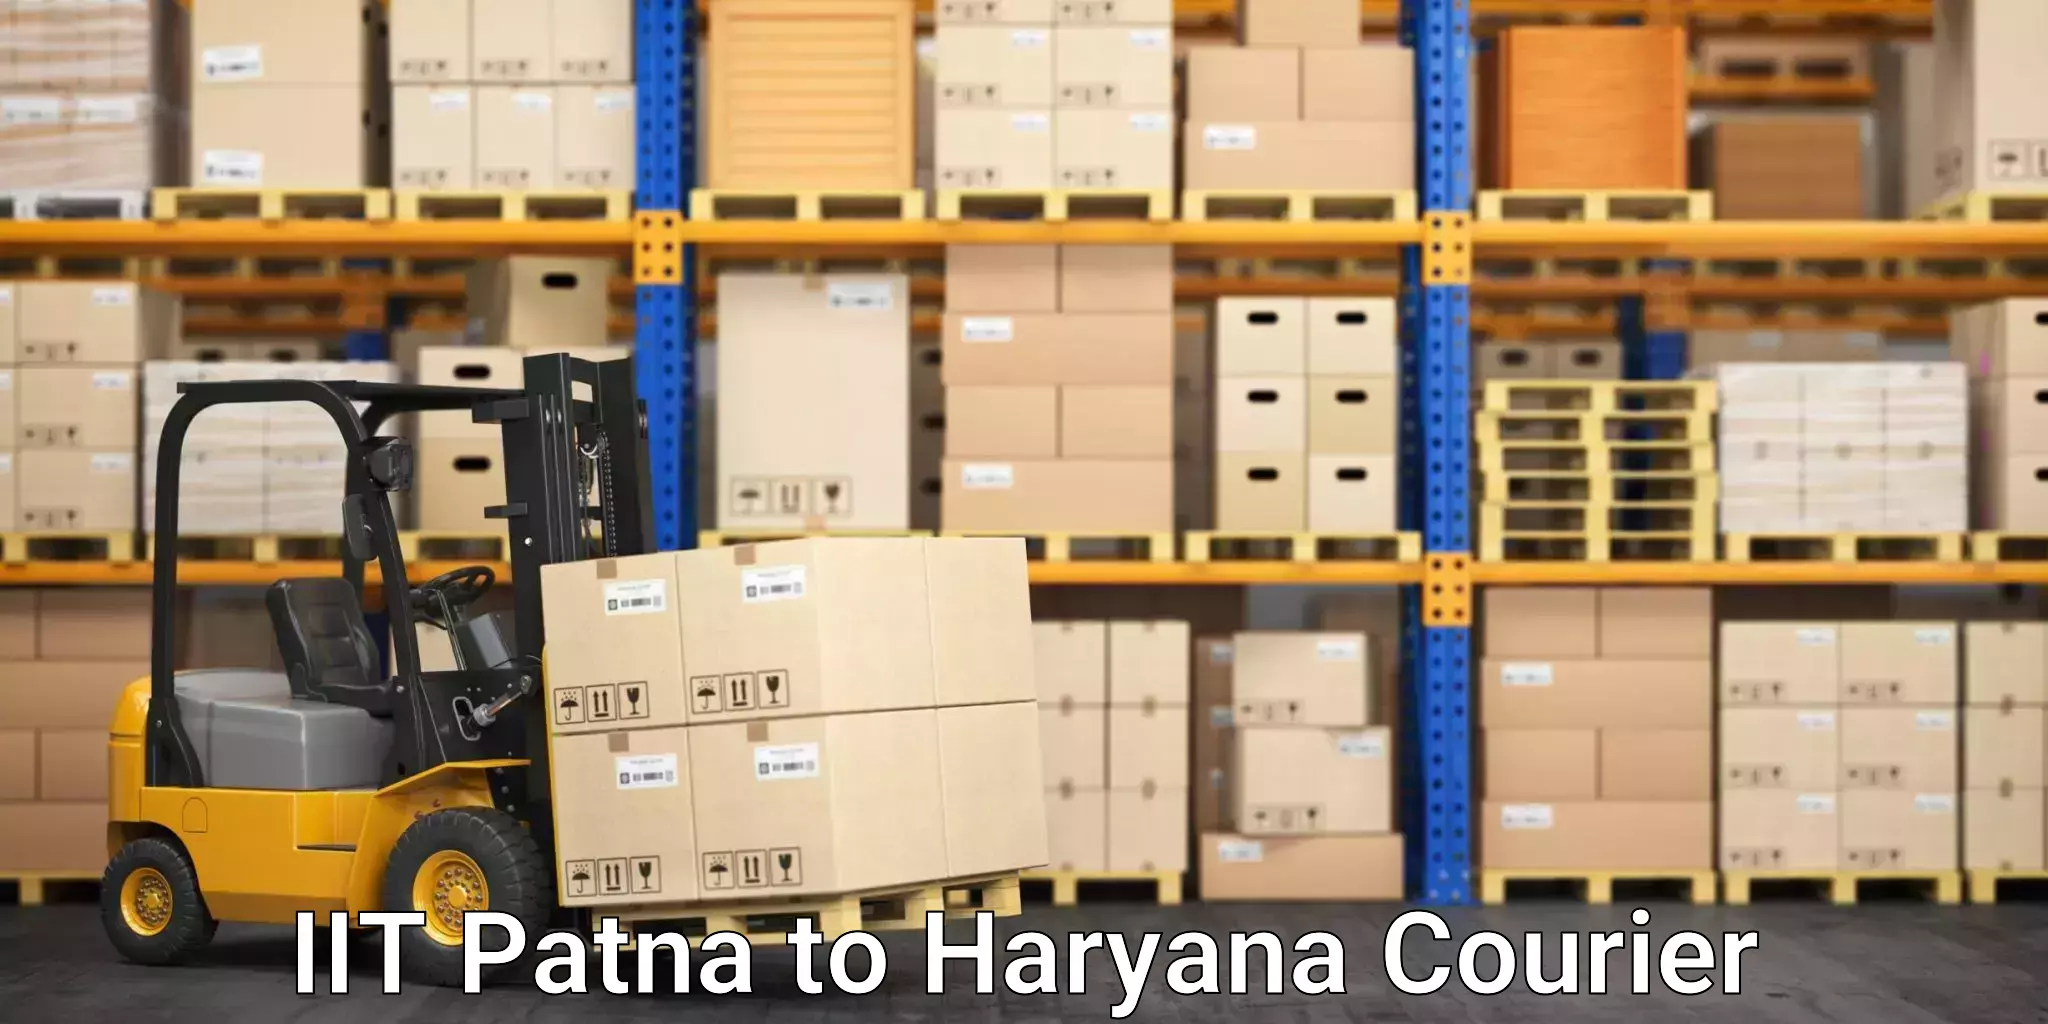 Professional movers and packers IIT Patna to Haryana